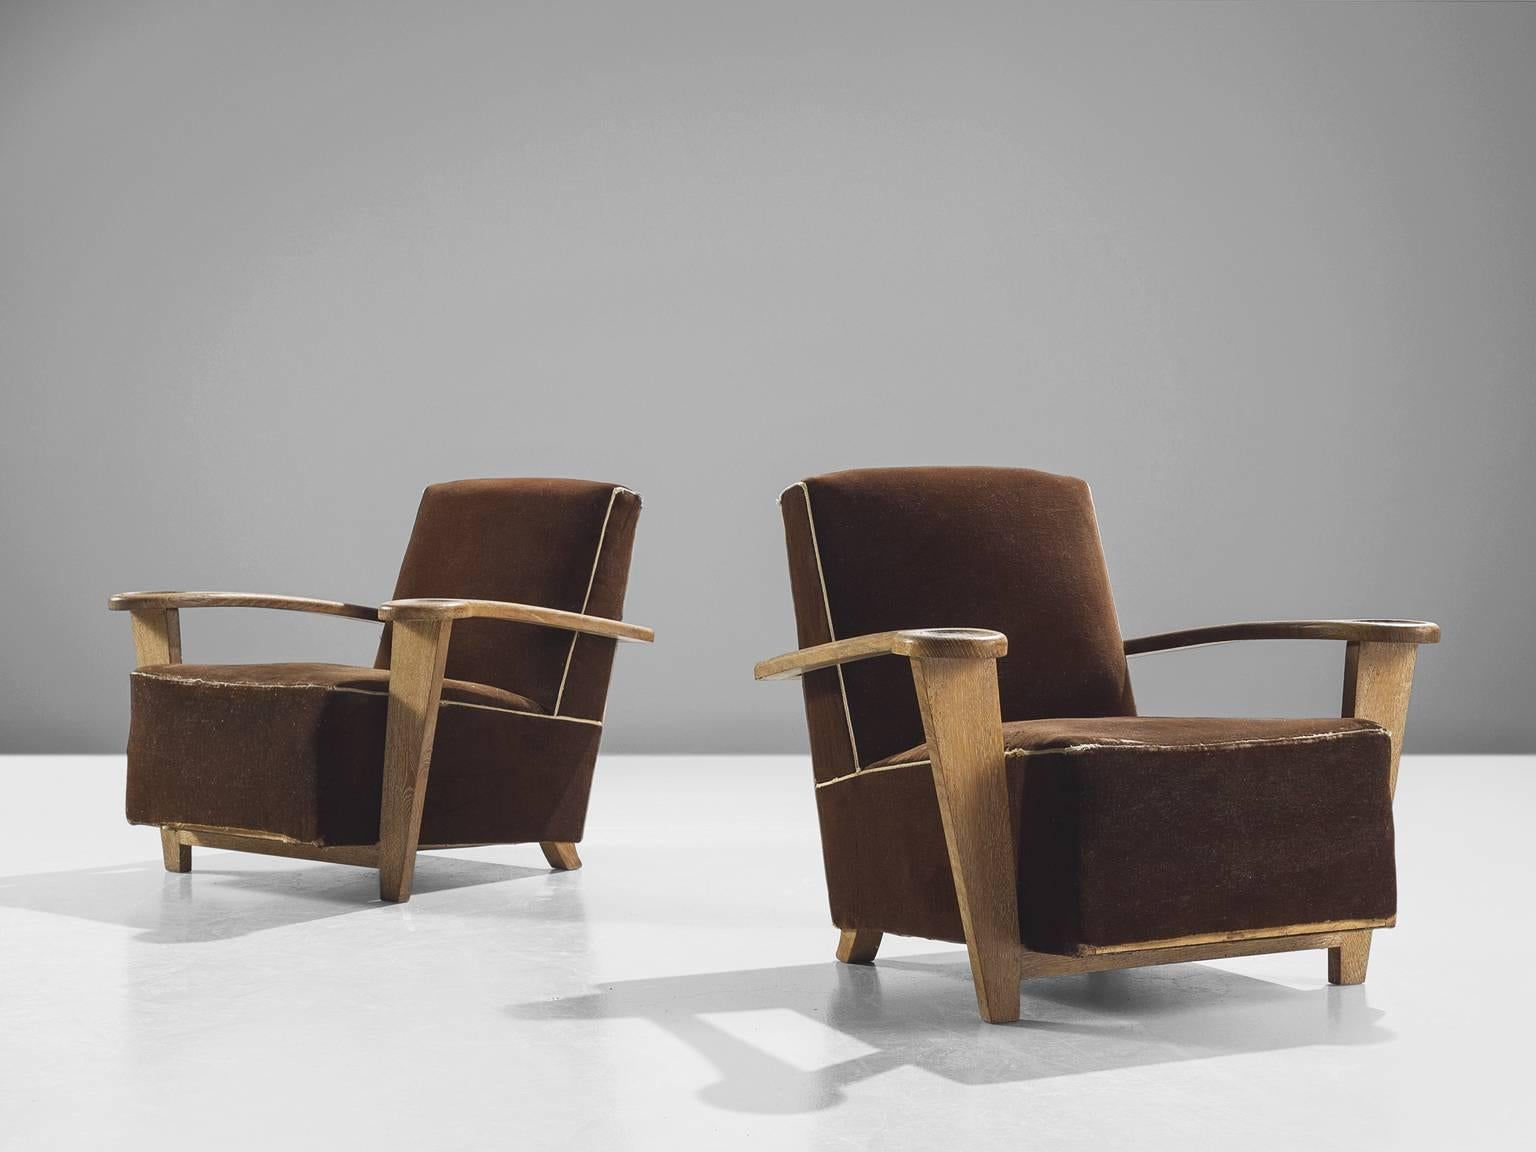 Pair of lounge chairs, oak and brown fabric, Belgium, 1940s.

This pair of rare grand armchairs is by the Belgian De Coene brothers. The chairs feature comfortable, thick cushions that are upholstered in a dark brown velvet. The velvet is rimmed